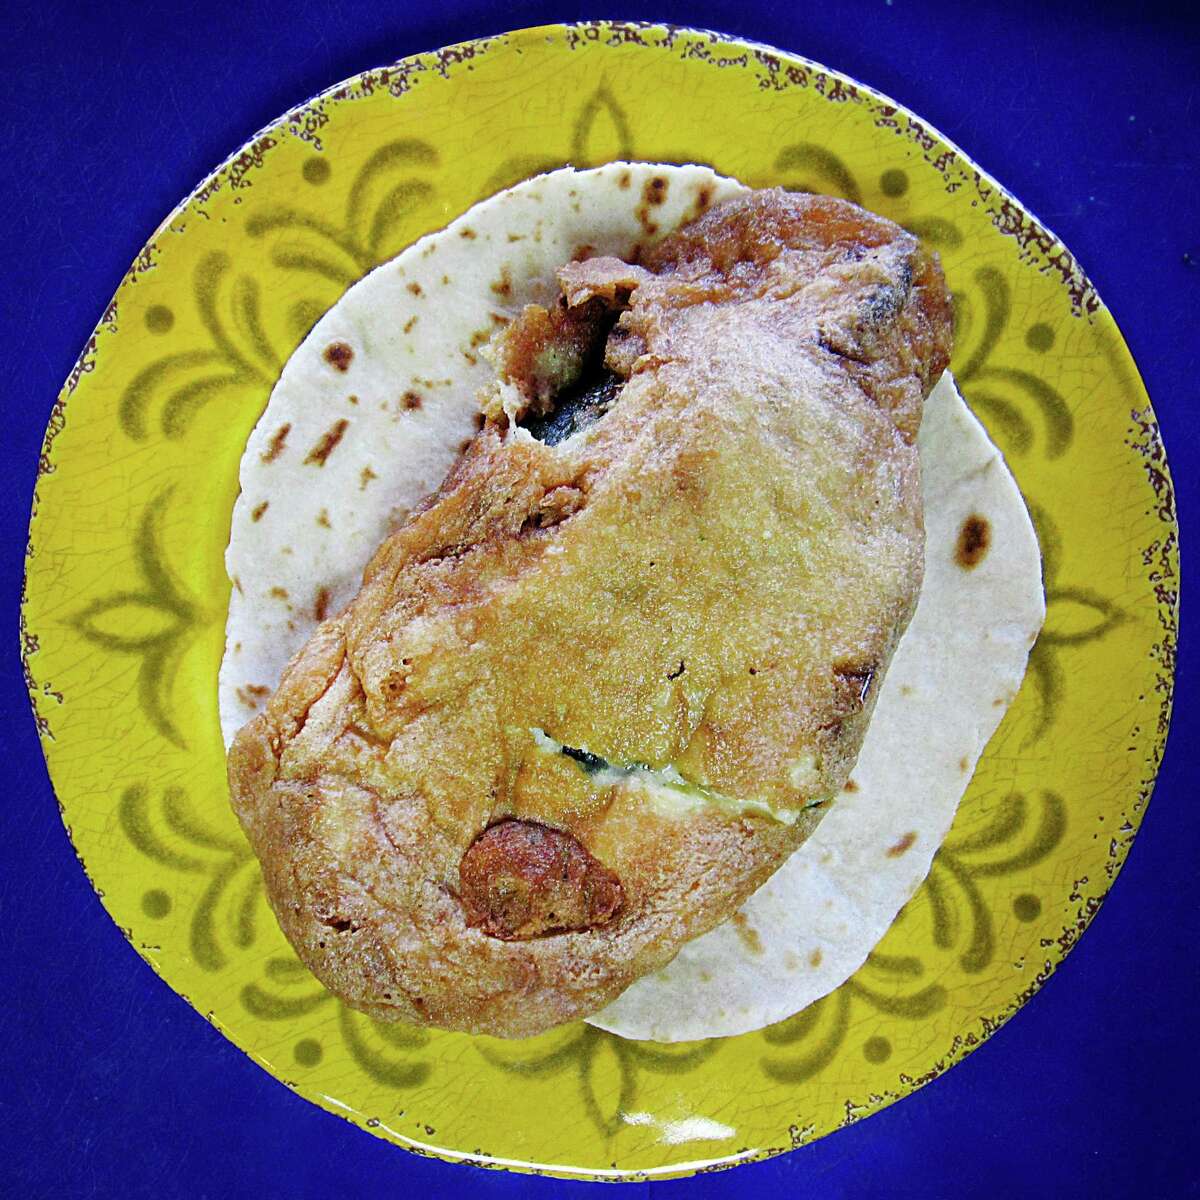 Chile relleno with cheese taco on a handmade flour tortilla from Tacos Martinez on West Commerce Street.